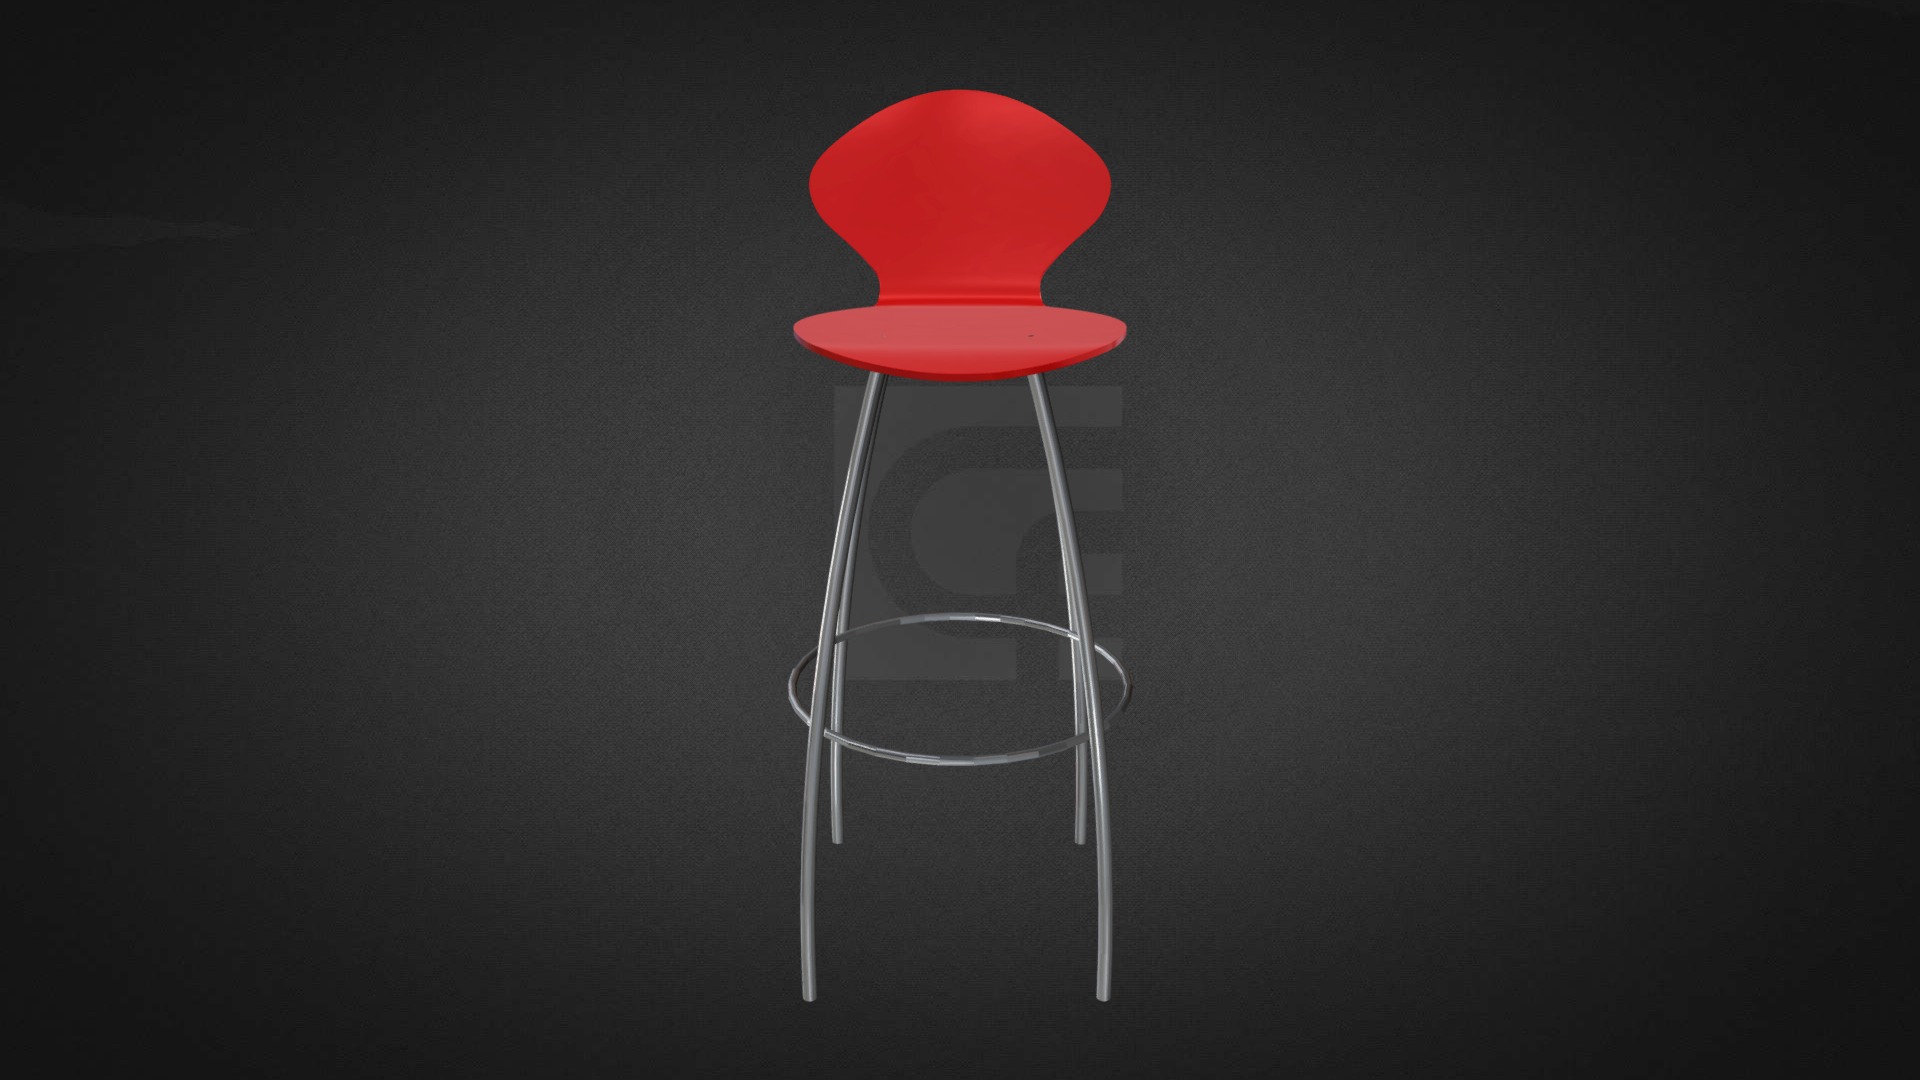 3D model Fiji Colour Stool Hire - This is a 3D model of the Fiji Colour Stool Hire. The 3D model is about a chair with a red cushion.